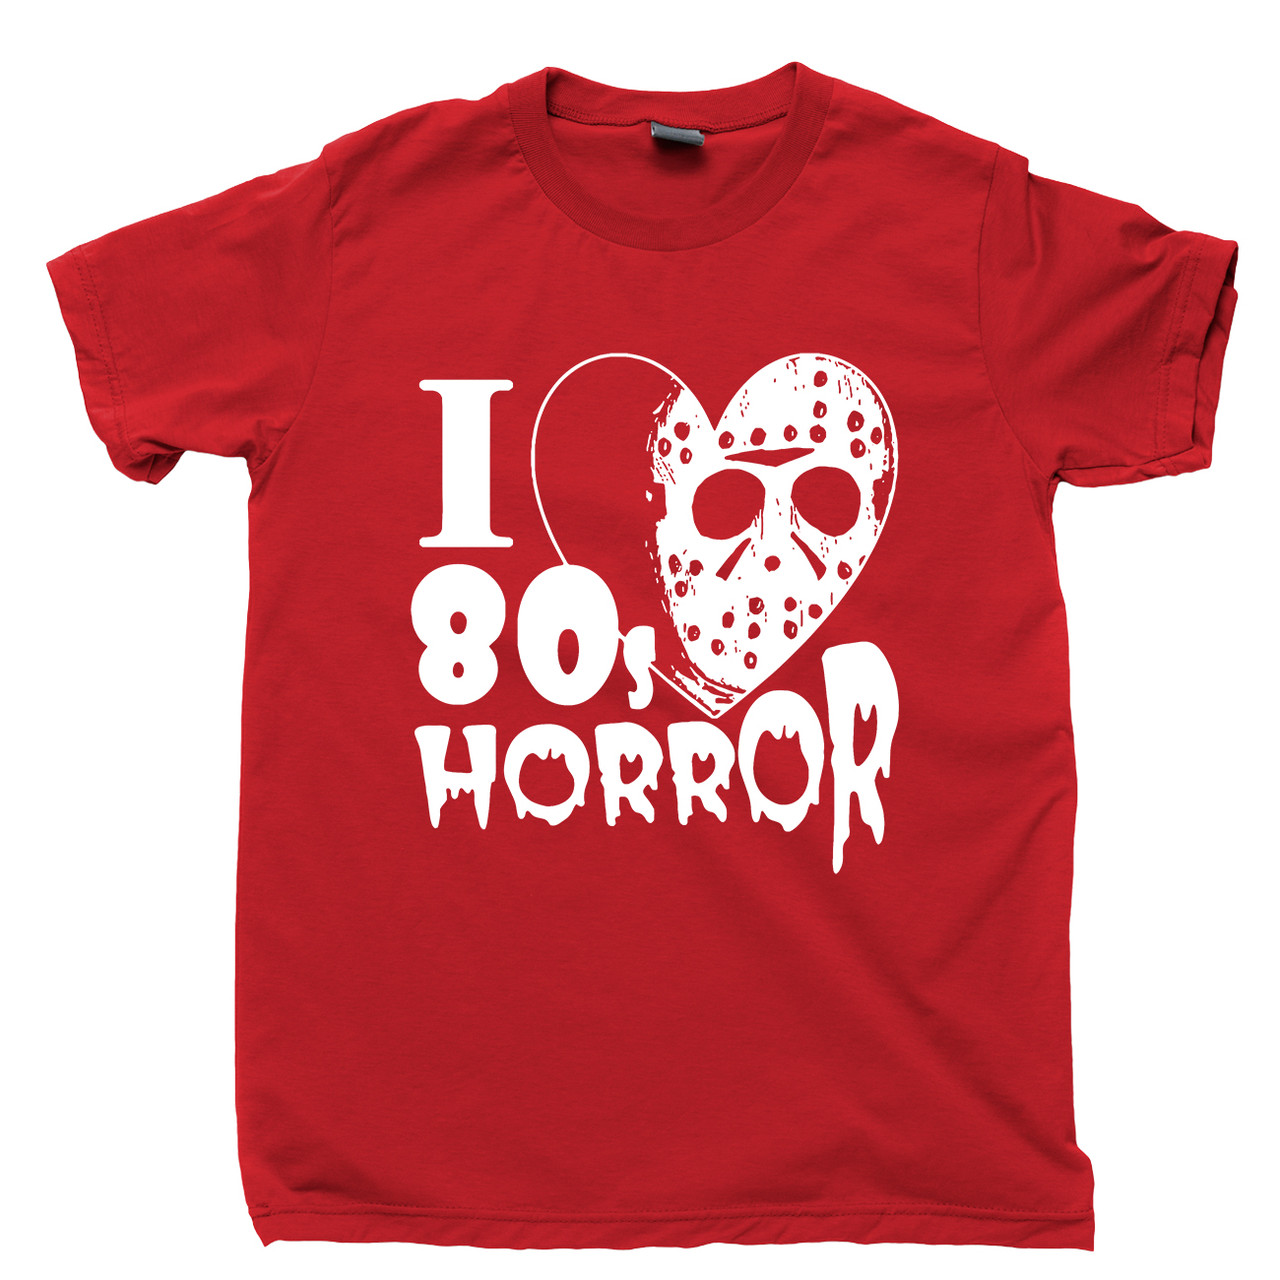 I Love 80s Horror T Shirt - Jason Voorhees, Friday The 13th Slasher Movies  Tee